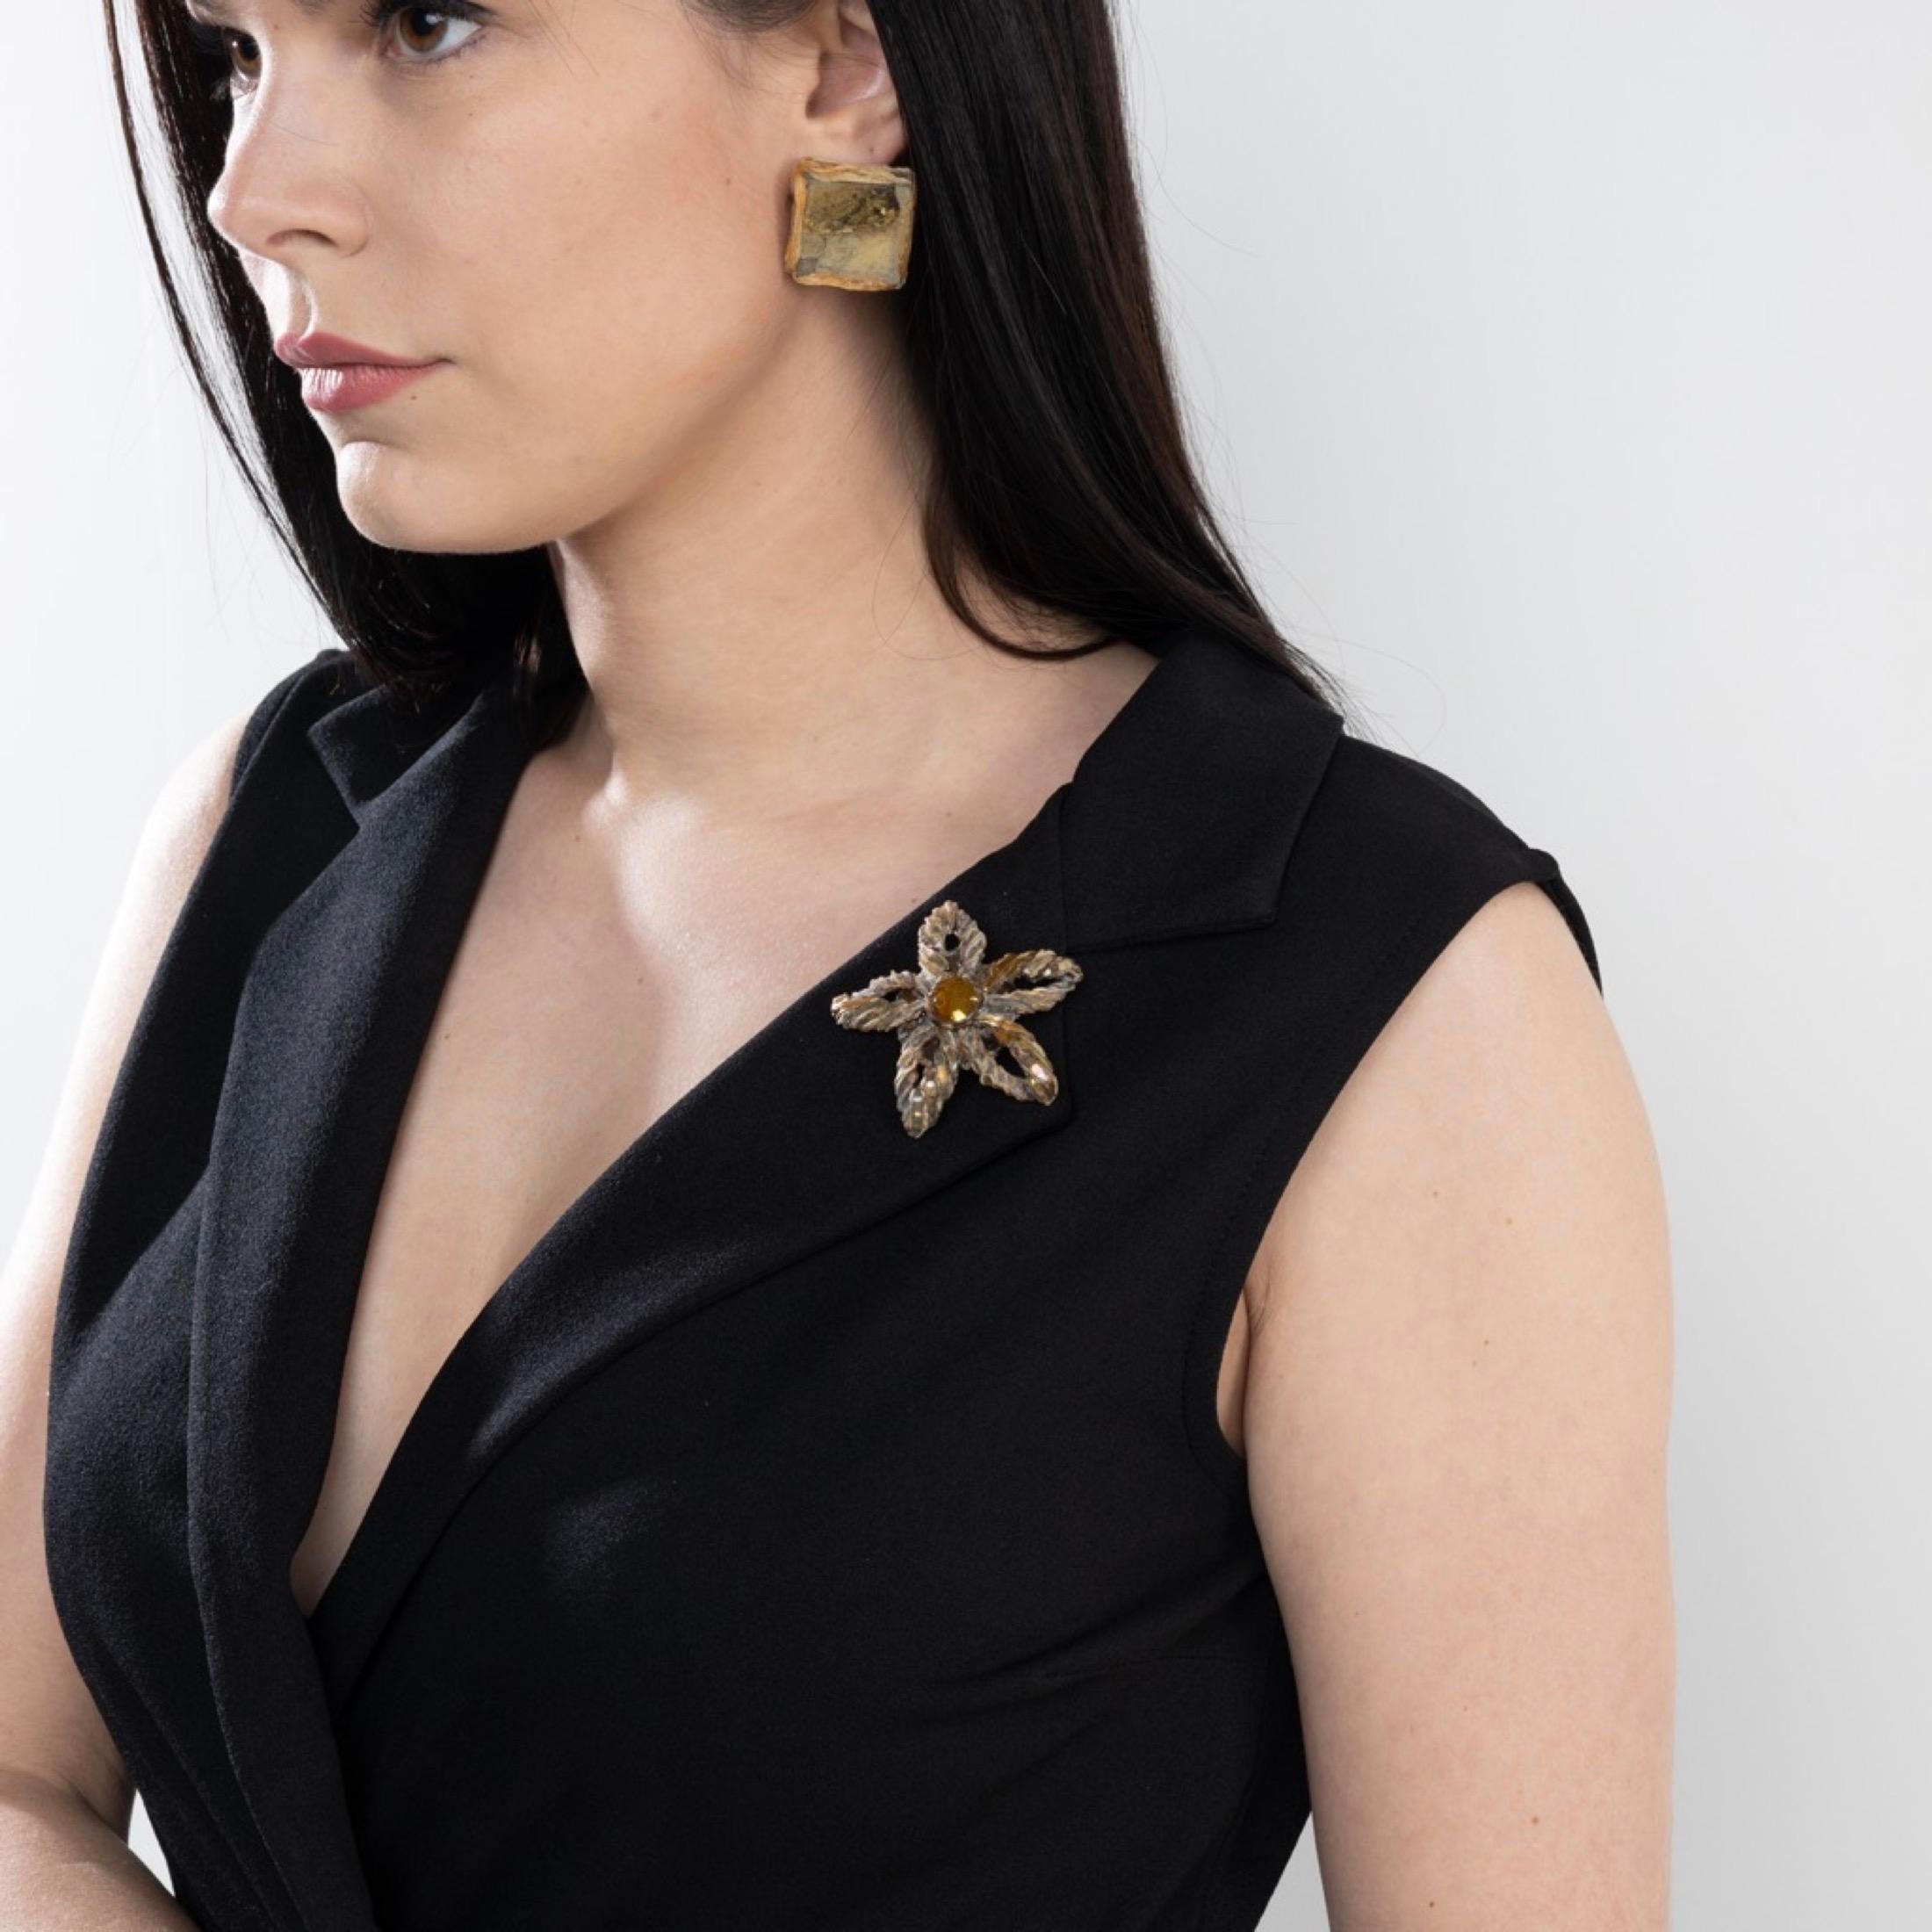 This light brown Talosel brooch by Line Vautrin is a unique and elegant piece, adorned with golden star-shaped mirrors and a small convex round mirror in the center. The points of the star are formed by Talosel which has been carefully scarified by